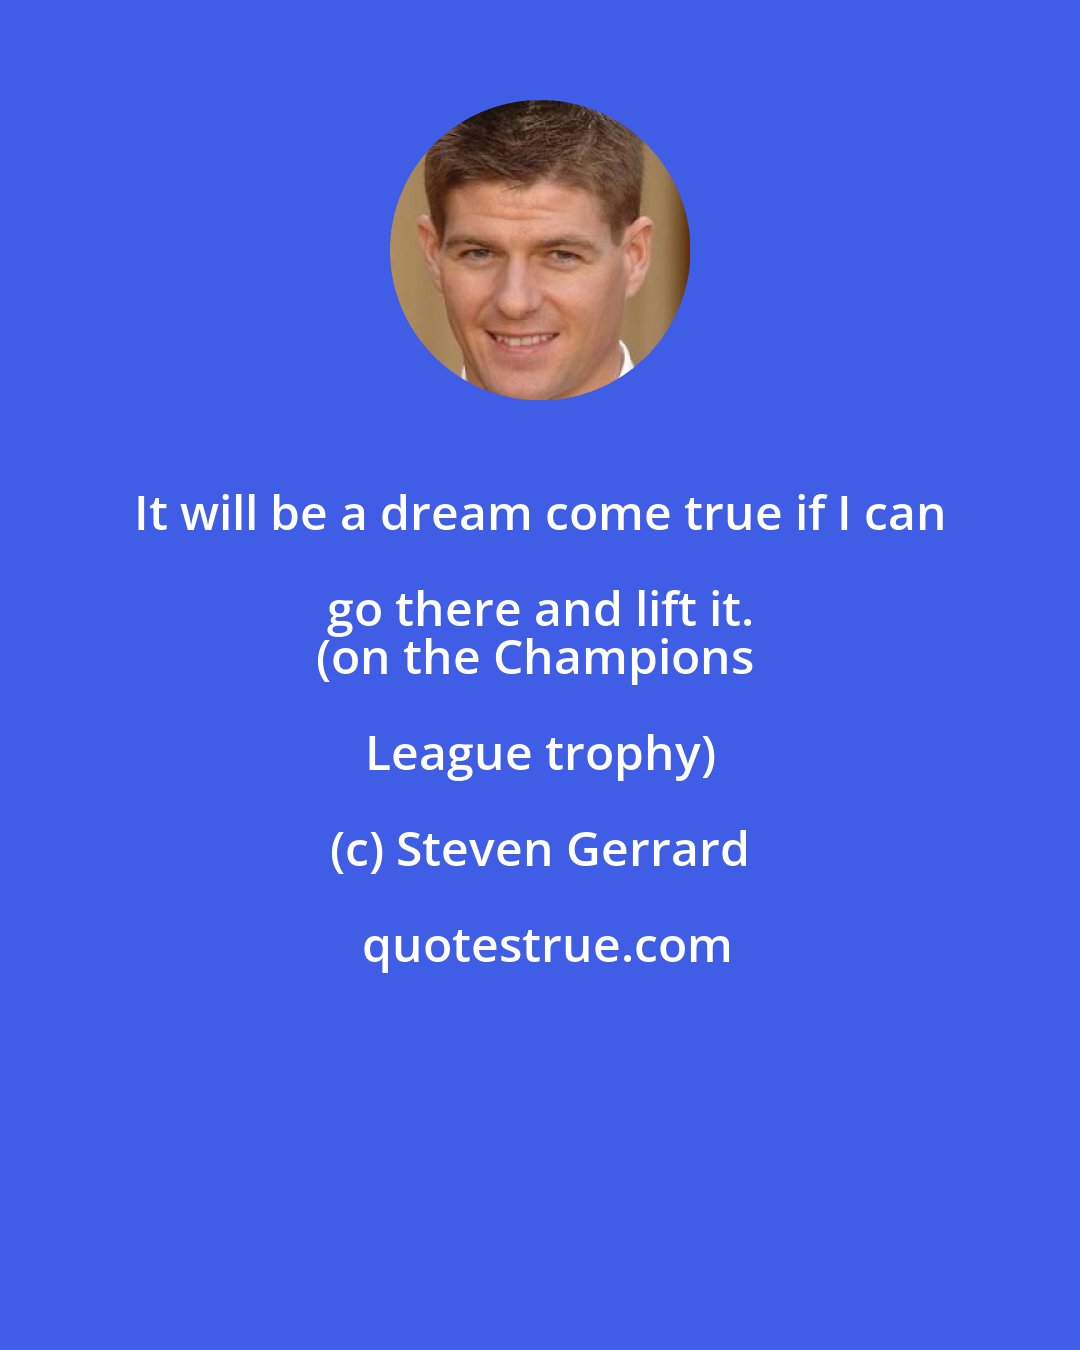 Steven Gerrard: It will be a dream come true if I can go there and lift it. 
(on the Champions League trophy)